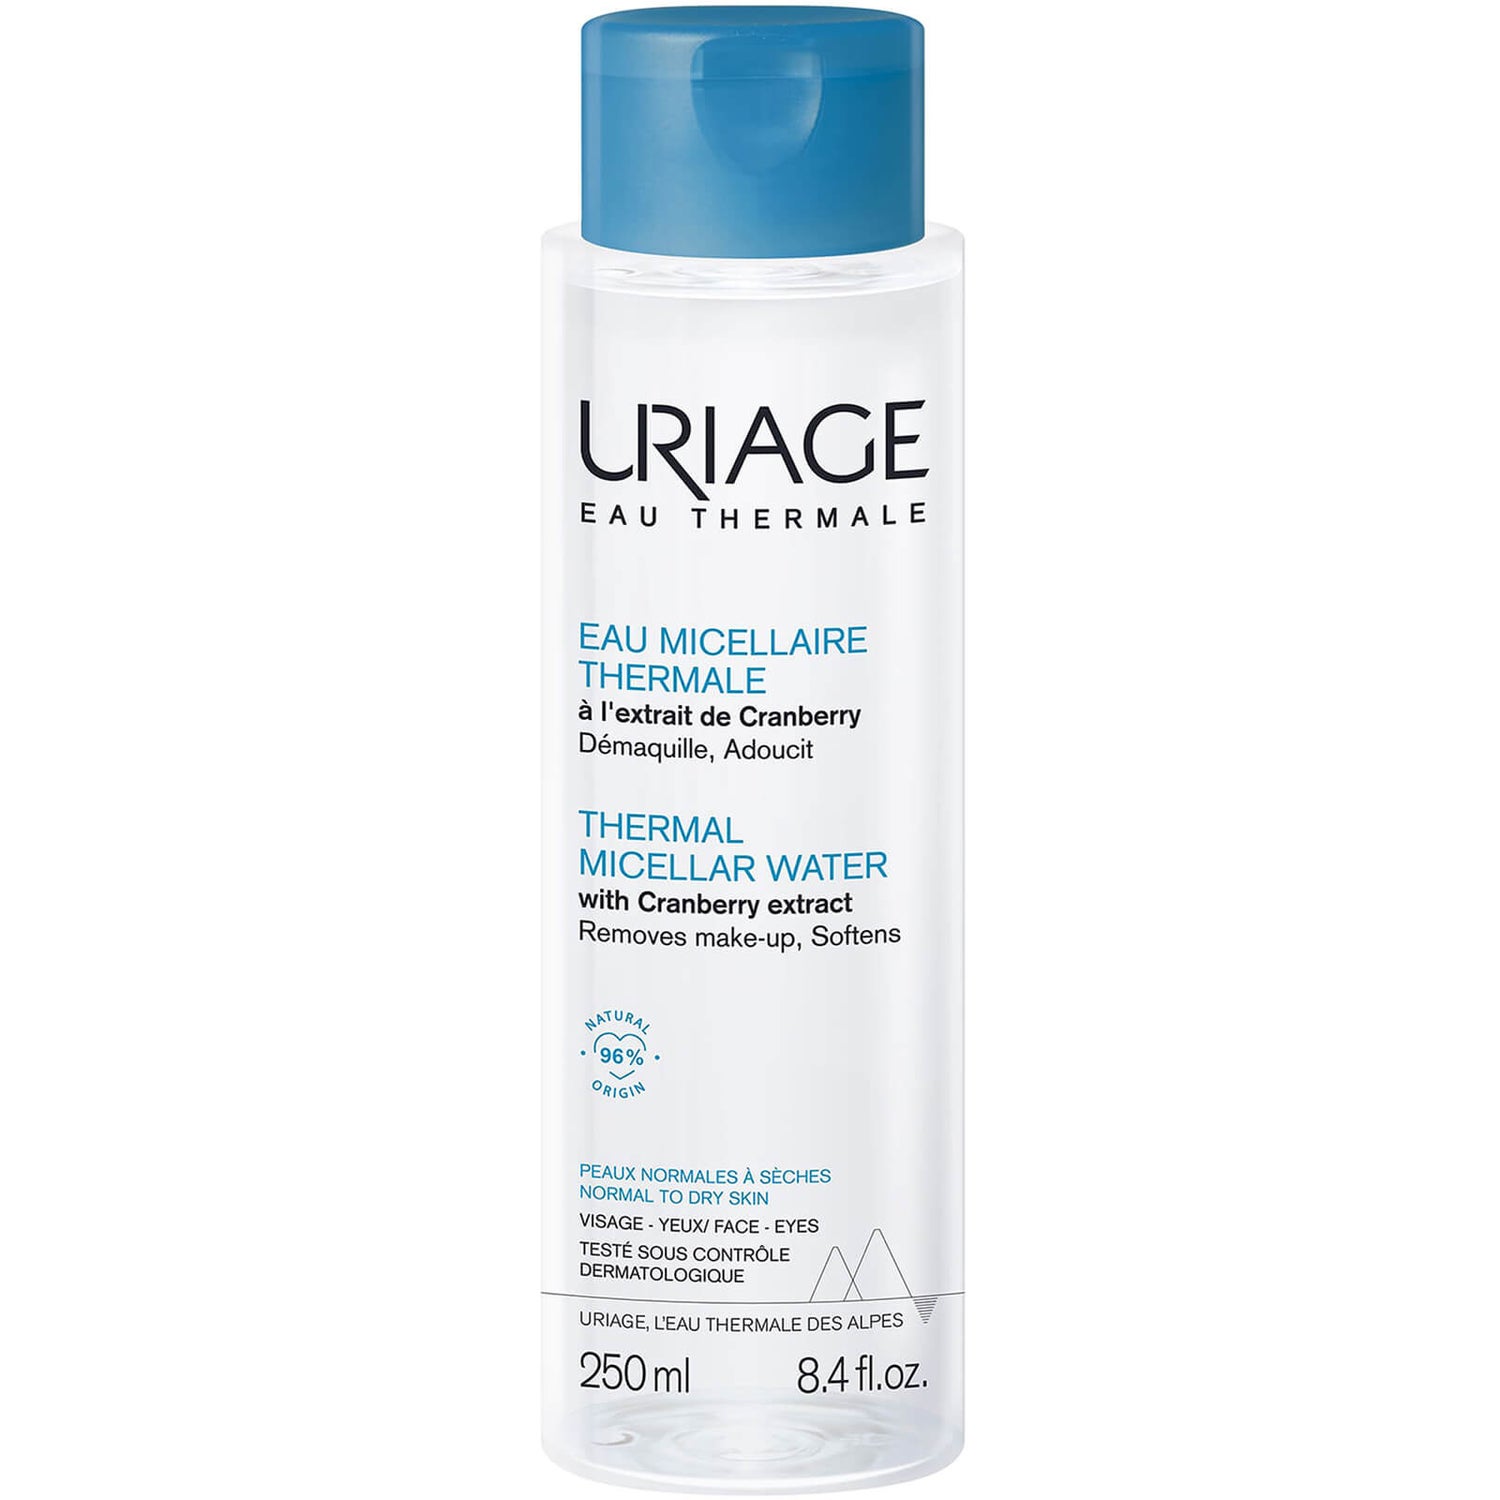 Uriage Thermal Micellar Water for Normal to Dry Skin 250 ml